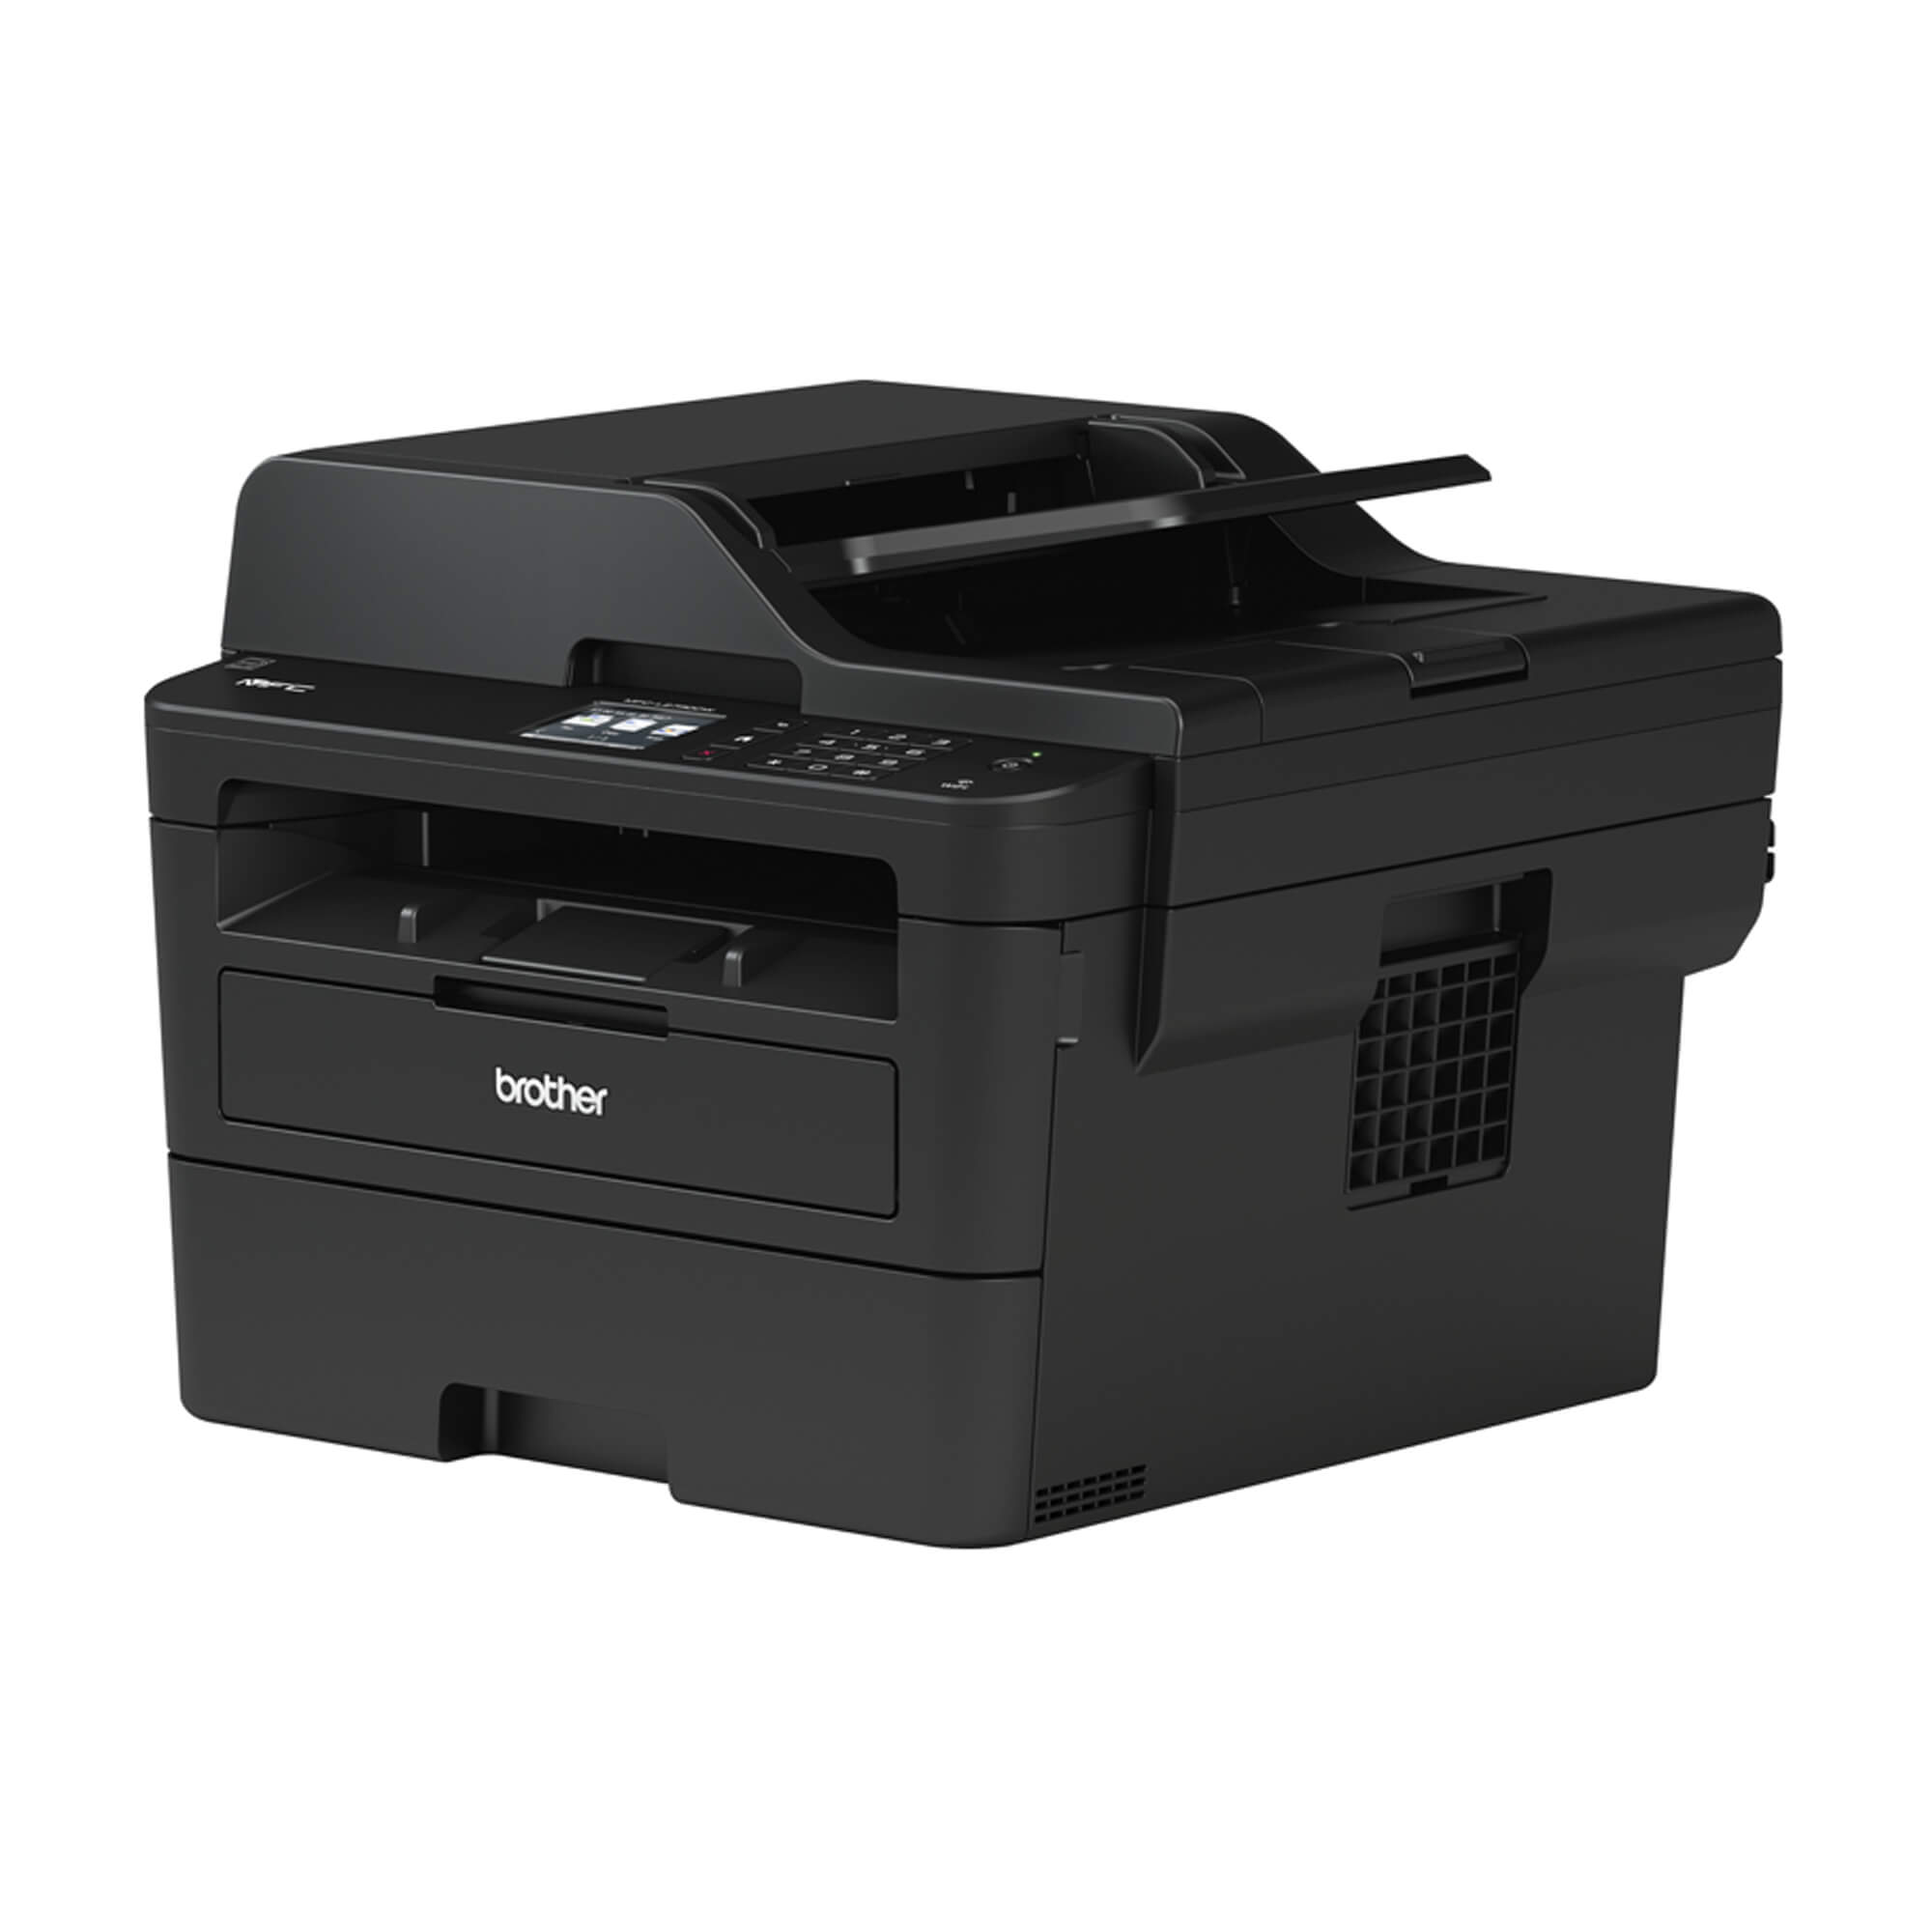 1. Best Overall Black And White Laser Printer: Brother MFC-L2750DW 